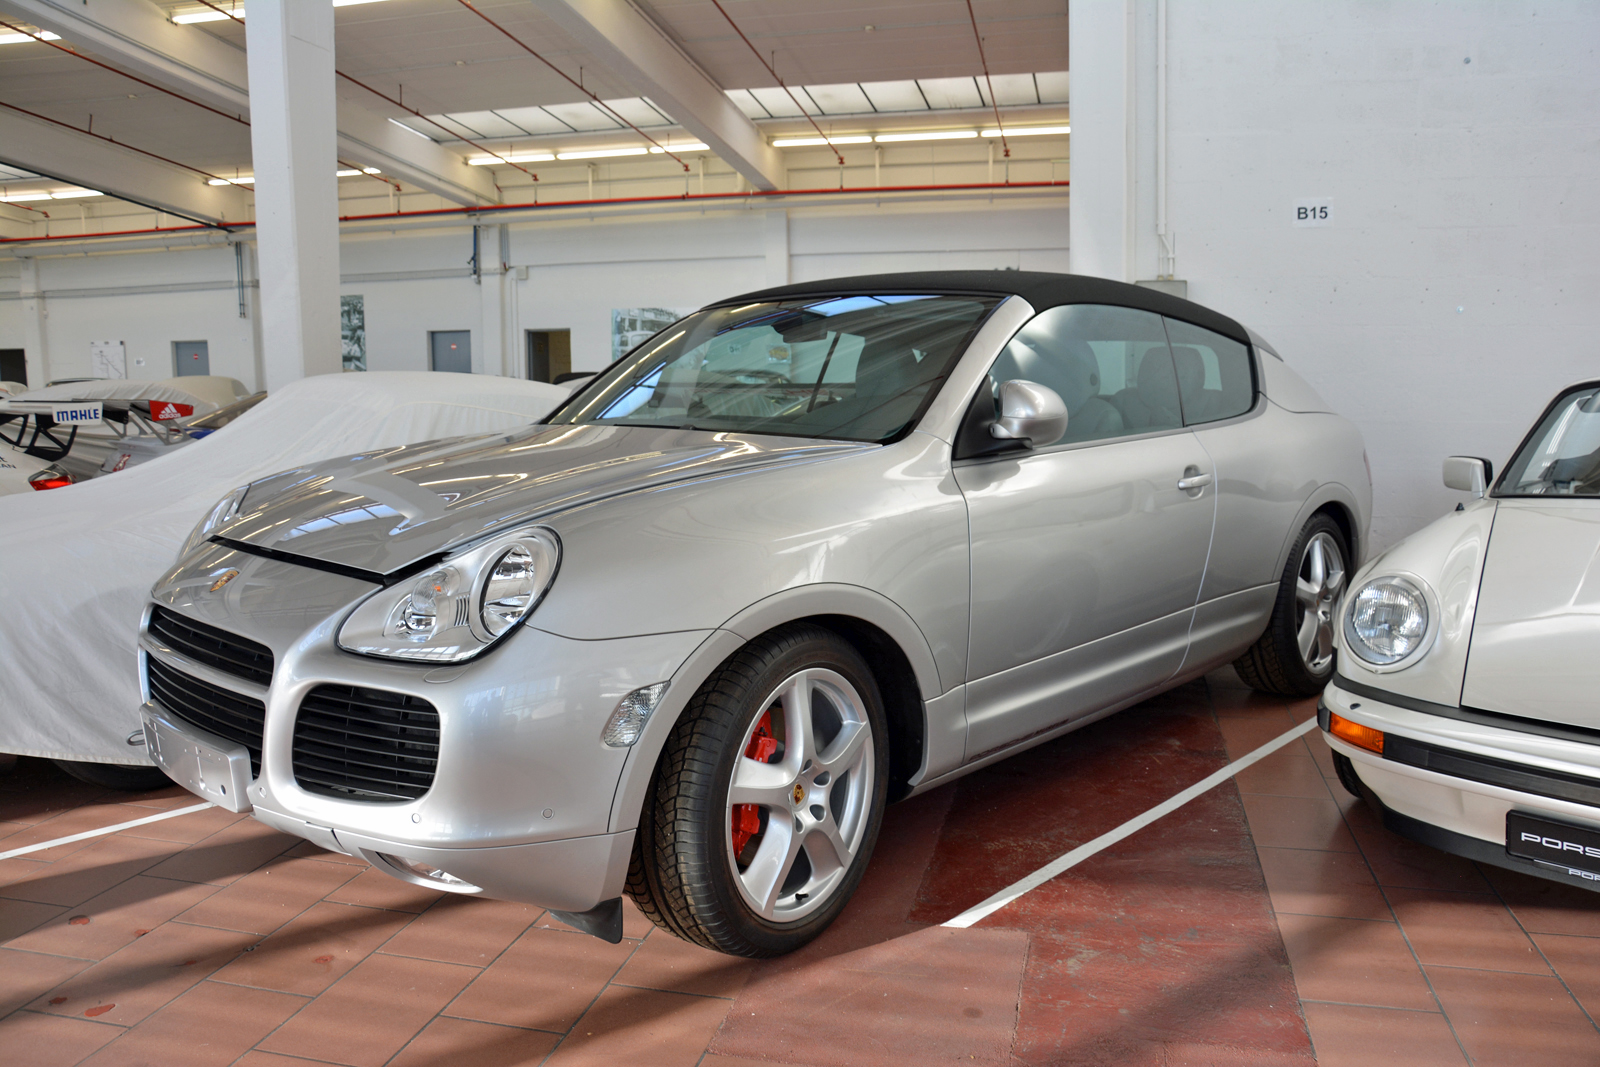 <p>Porsche tried upping the Cayenne’s cool factor by chopping off its roof. The end result was undeniably more <strong>awkward</strong> than captivating, and the project was quickly abandoned, but valuable lessons were learned from it. An evolution of the prototype’s trick folding roof equips the current 911 Targa.</p>